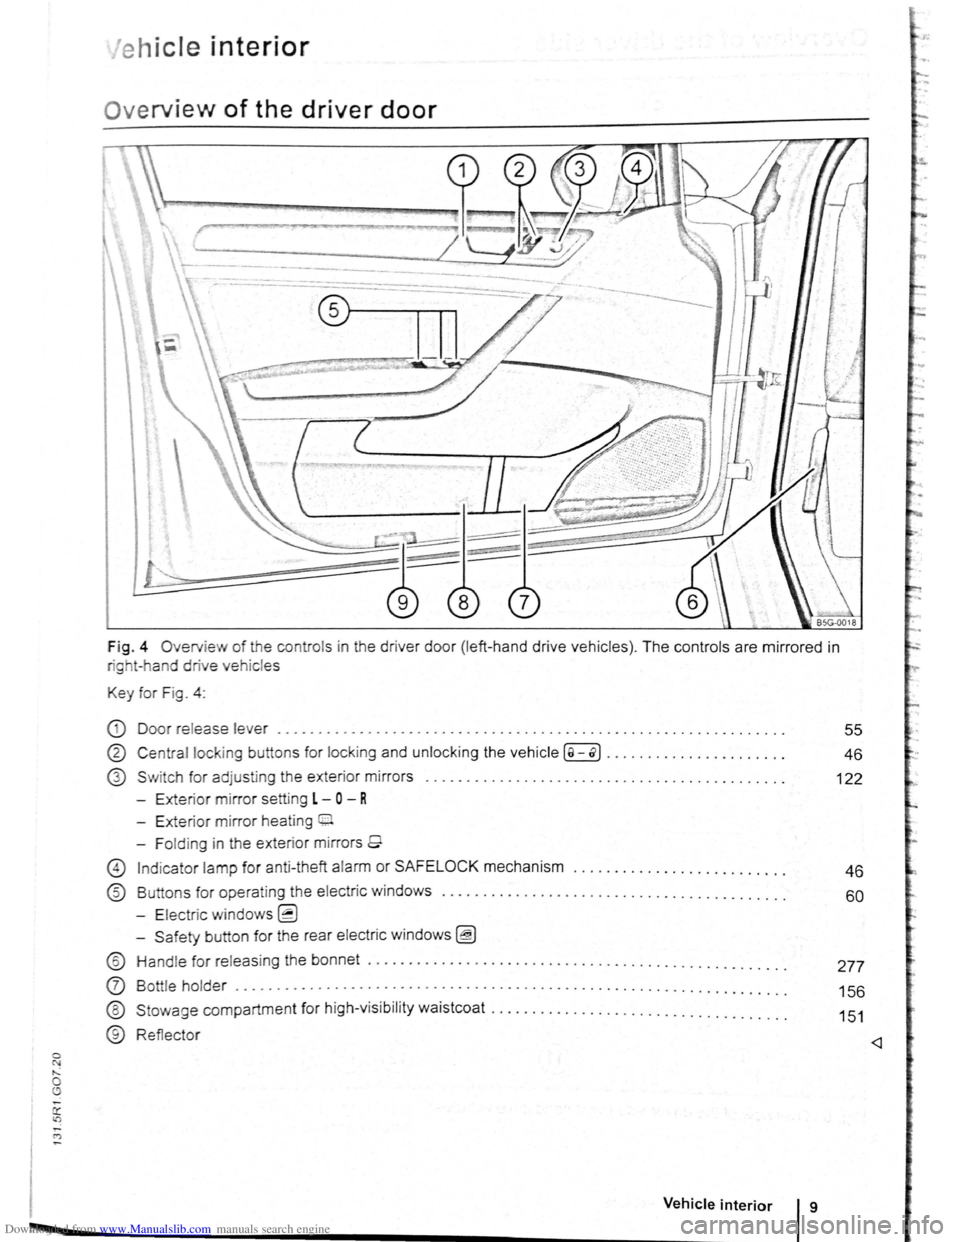 VOLKSWAGEN BEETLE 2008  Owners Manual Downloaded from www.Manualslib.com manuals search engine 0 N ,..; 0 
e h ic le interior 
Ov erview of the driver door 
Fig . 4 Overv ie w of the  contro ls  in  the drive r doo r (left -ha nd  dr ive